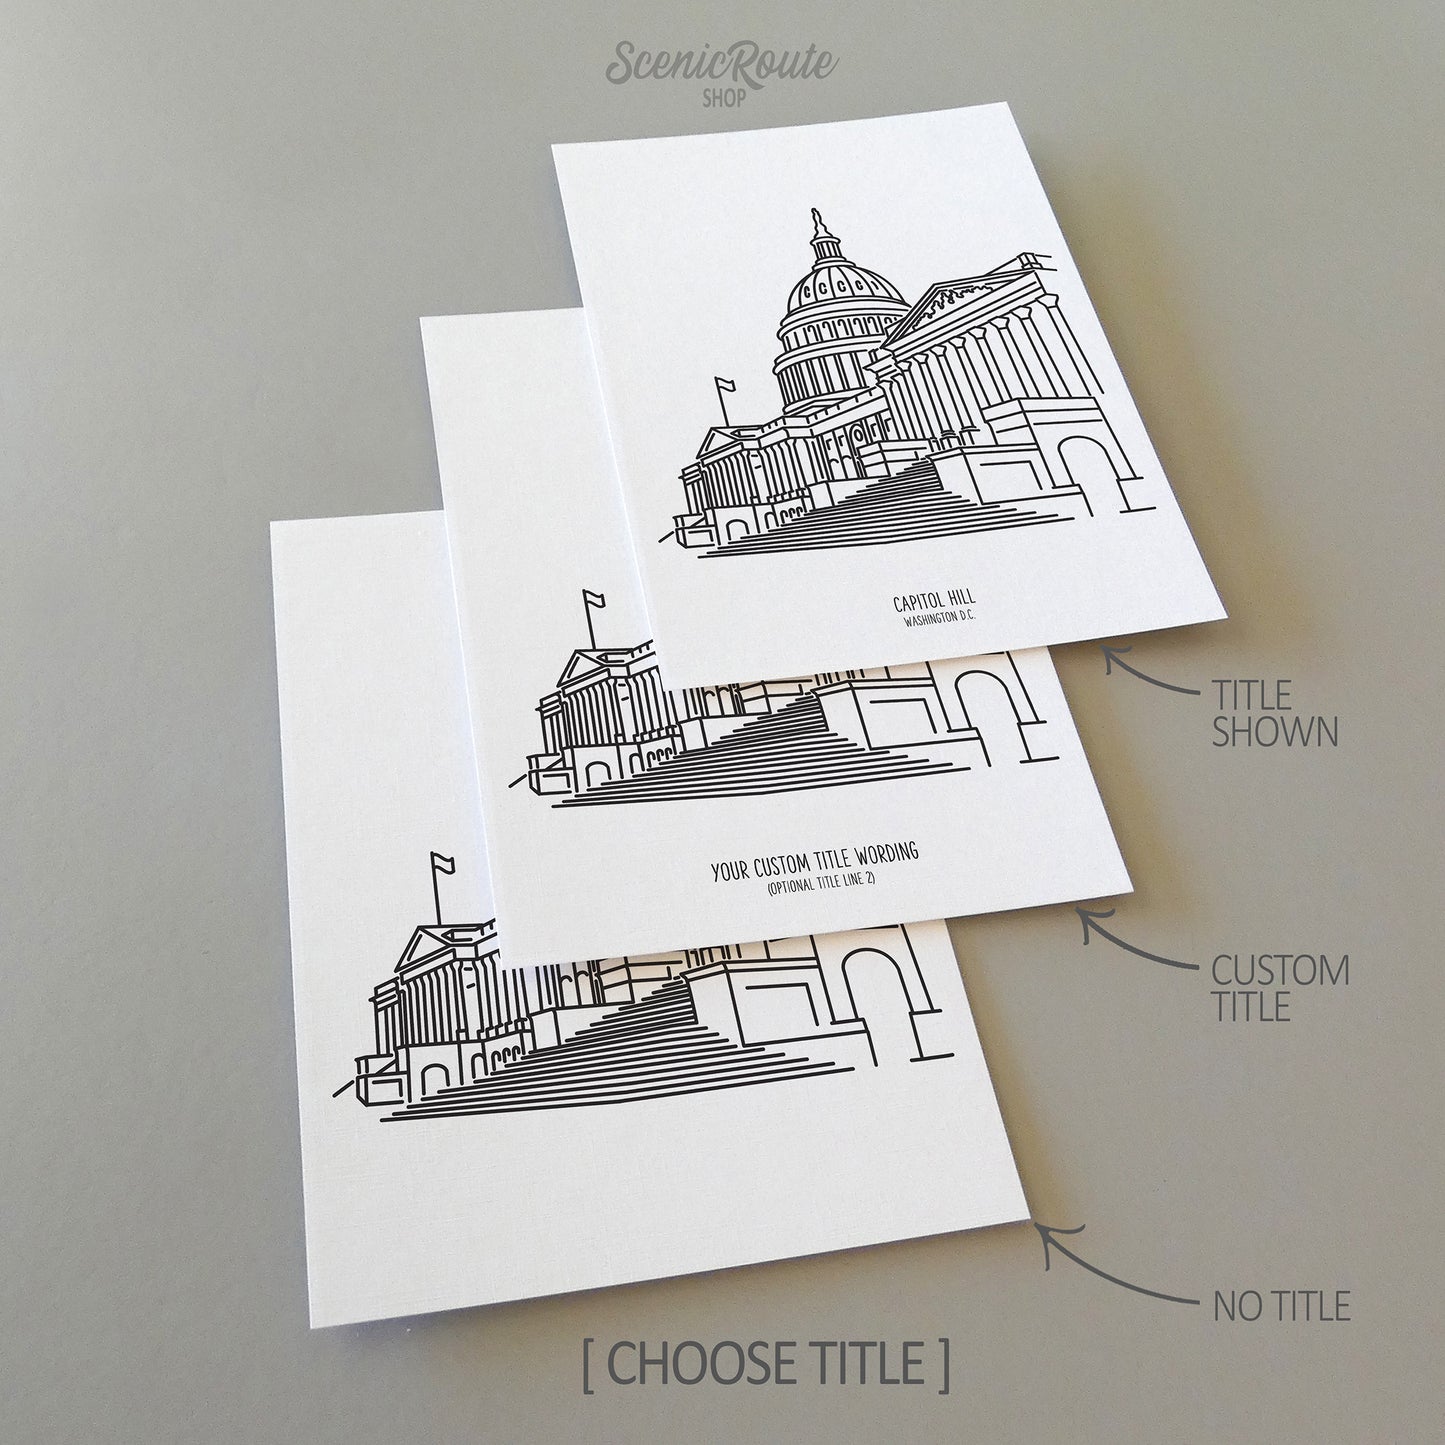 Three line art drawings of the Capitol Building in Washington DC on white linen paper with a gray background.  The pieces are shown with title options that can be chosen and personalized.